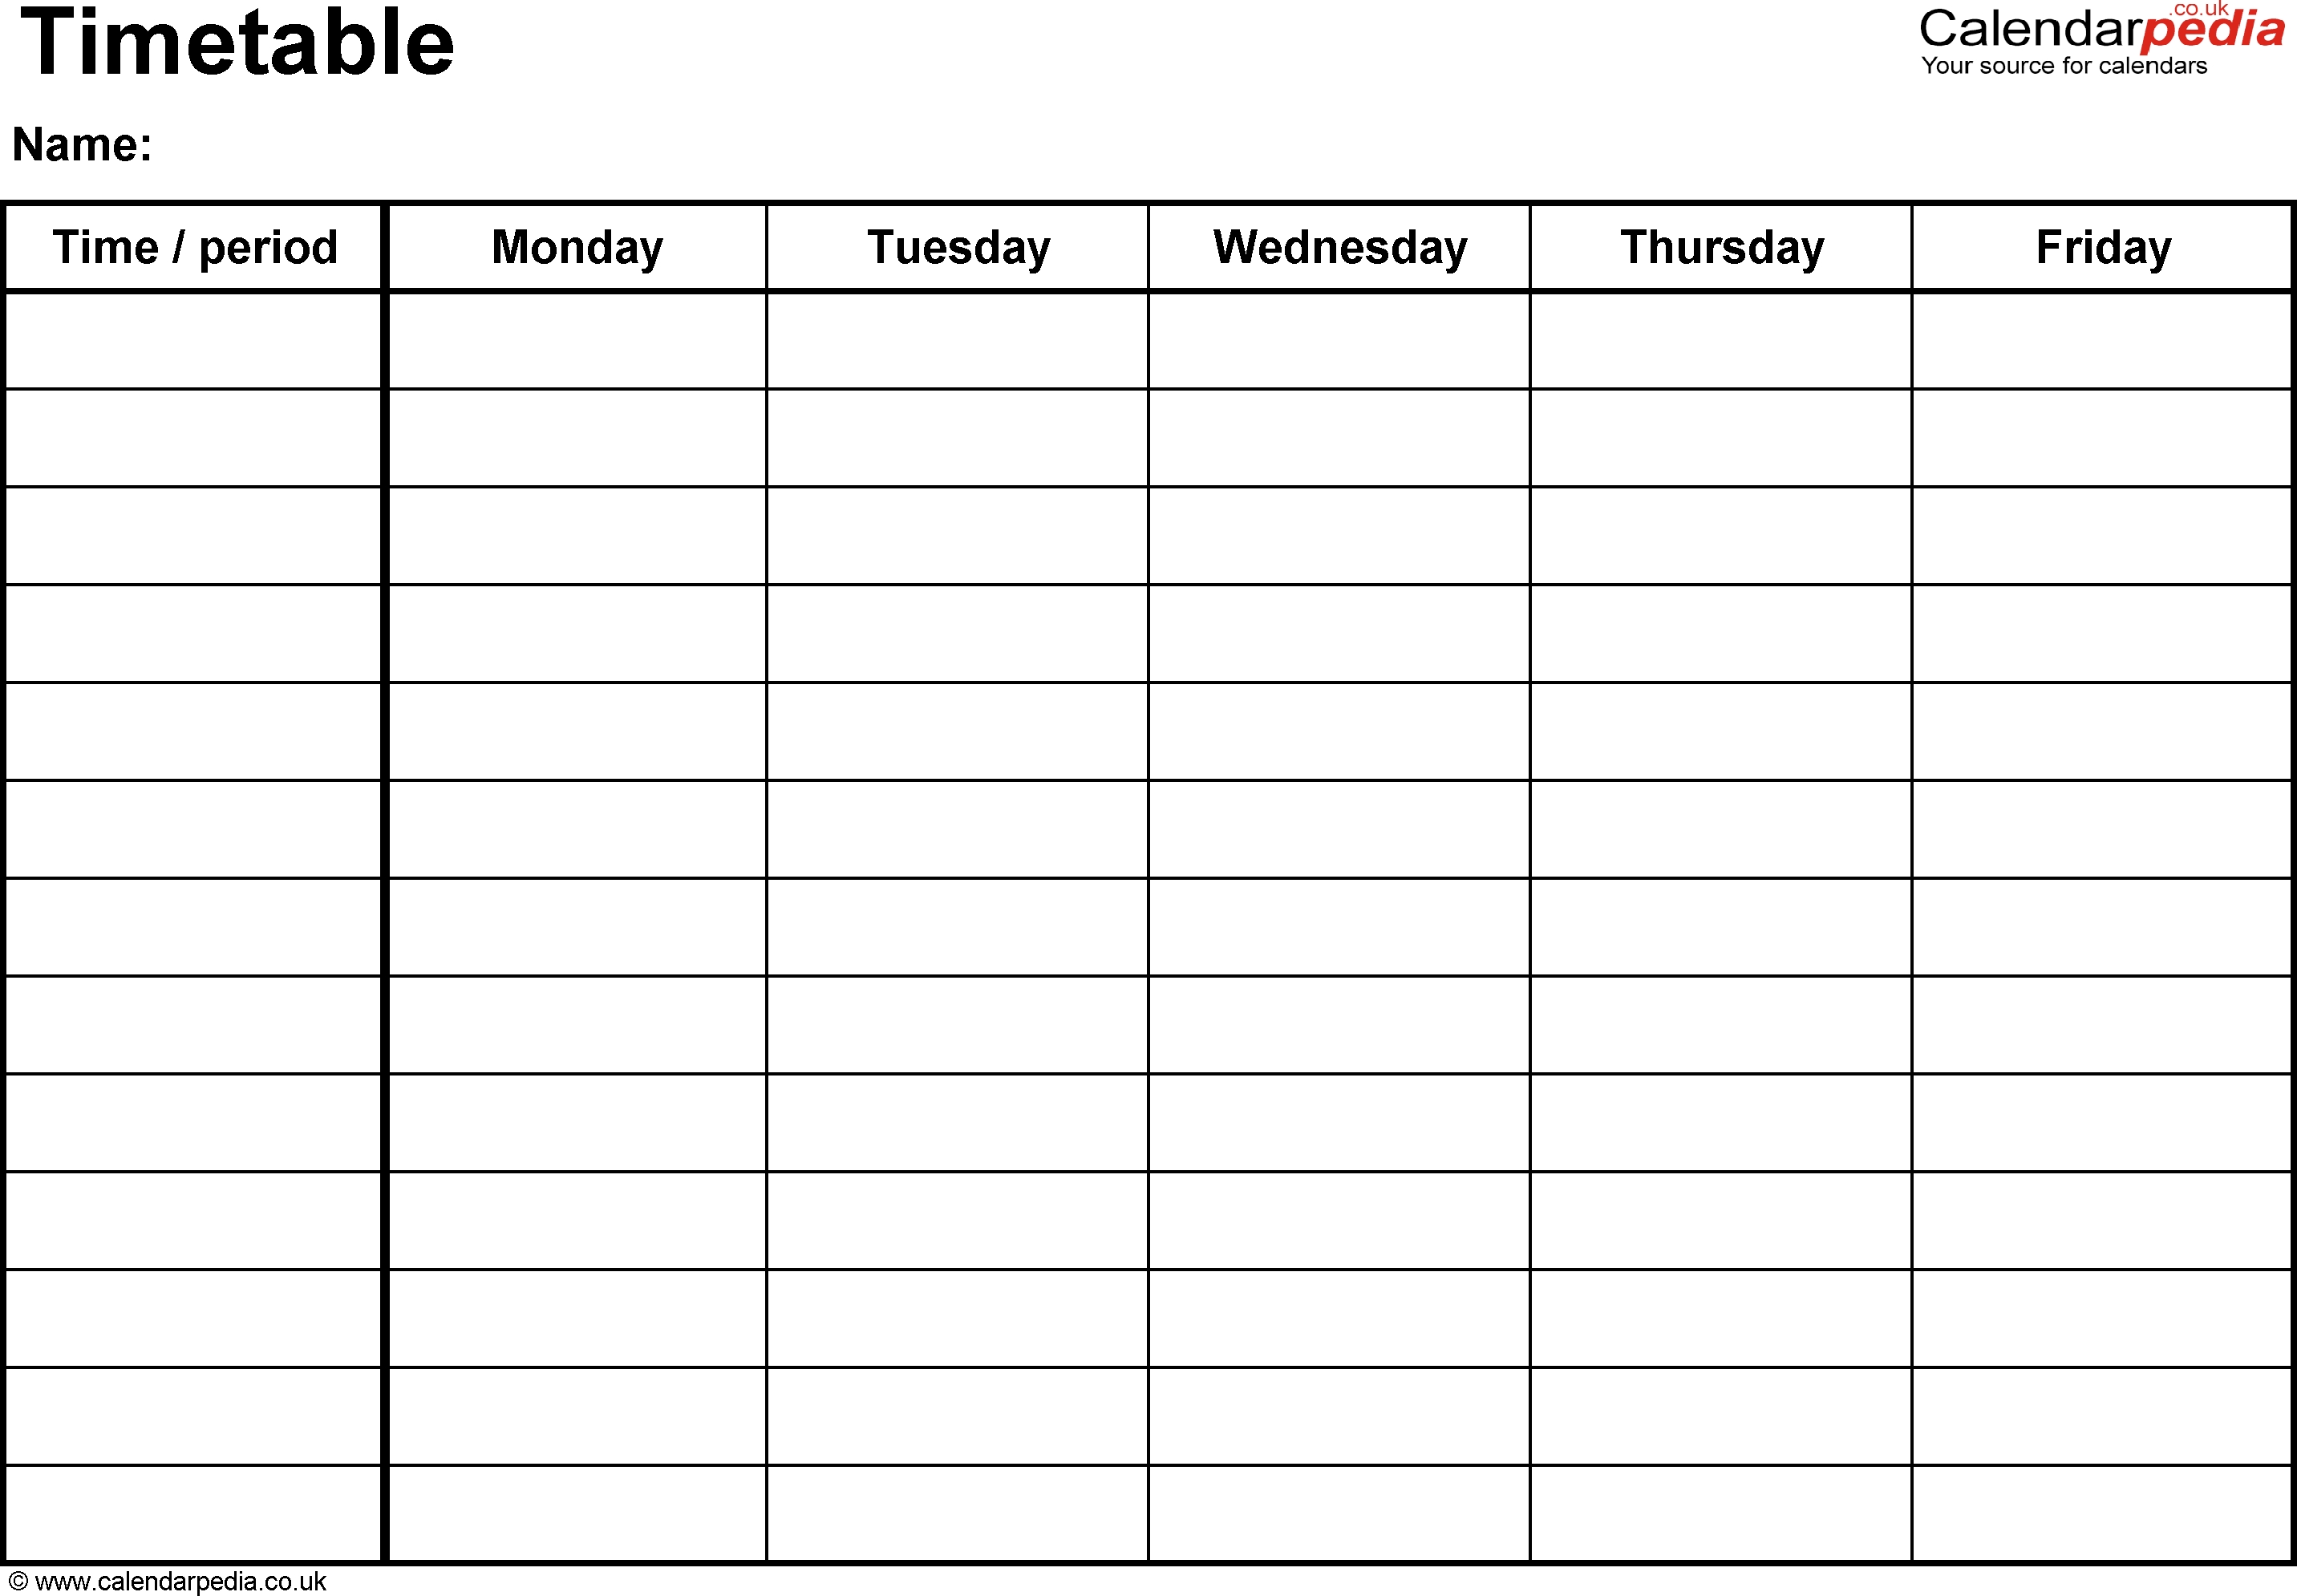 Excel Timetable Template 1: Landscape Format, A4, 1 Page, Monday To 5 Day Week Calendar Template Excel